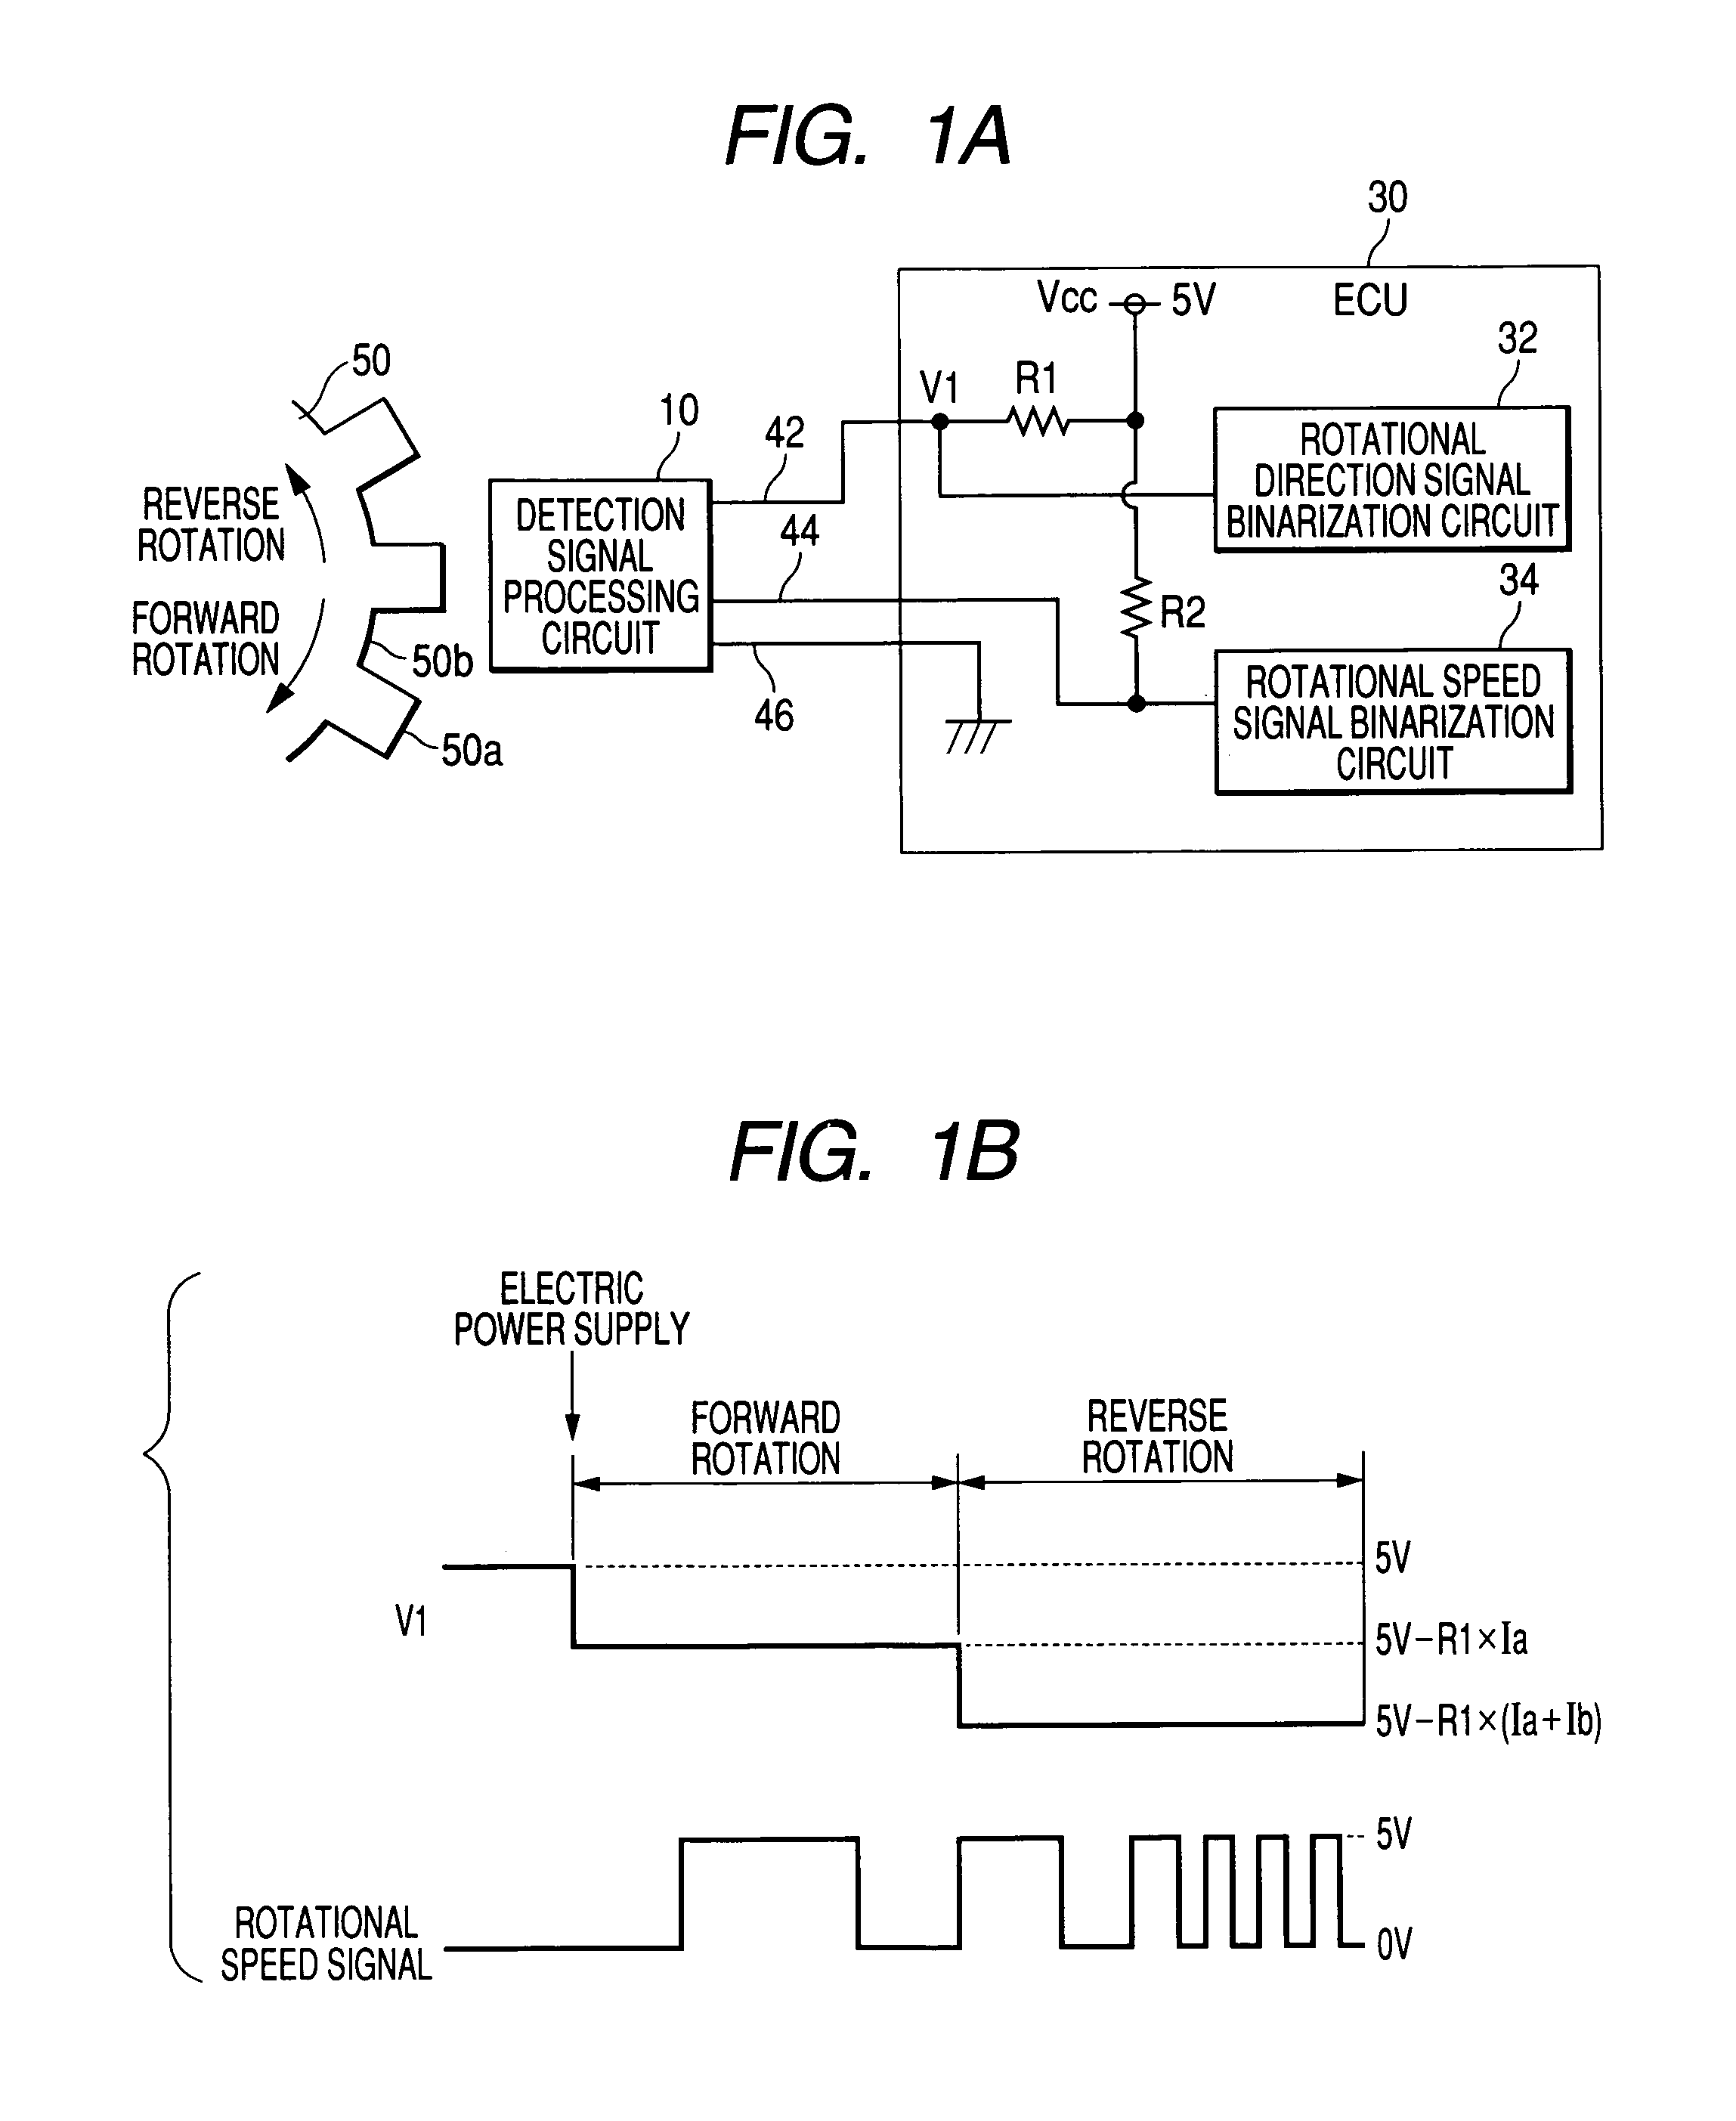 Detection signal processing circuit and detection signal processing apparatus for a rotation sensor